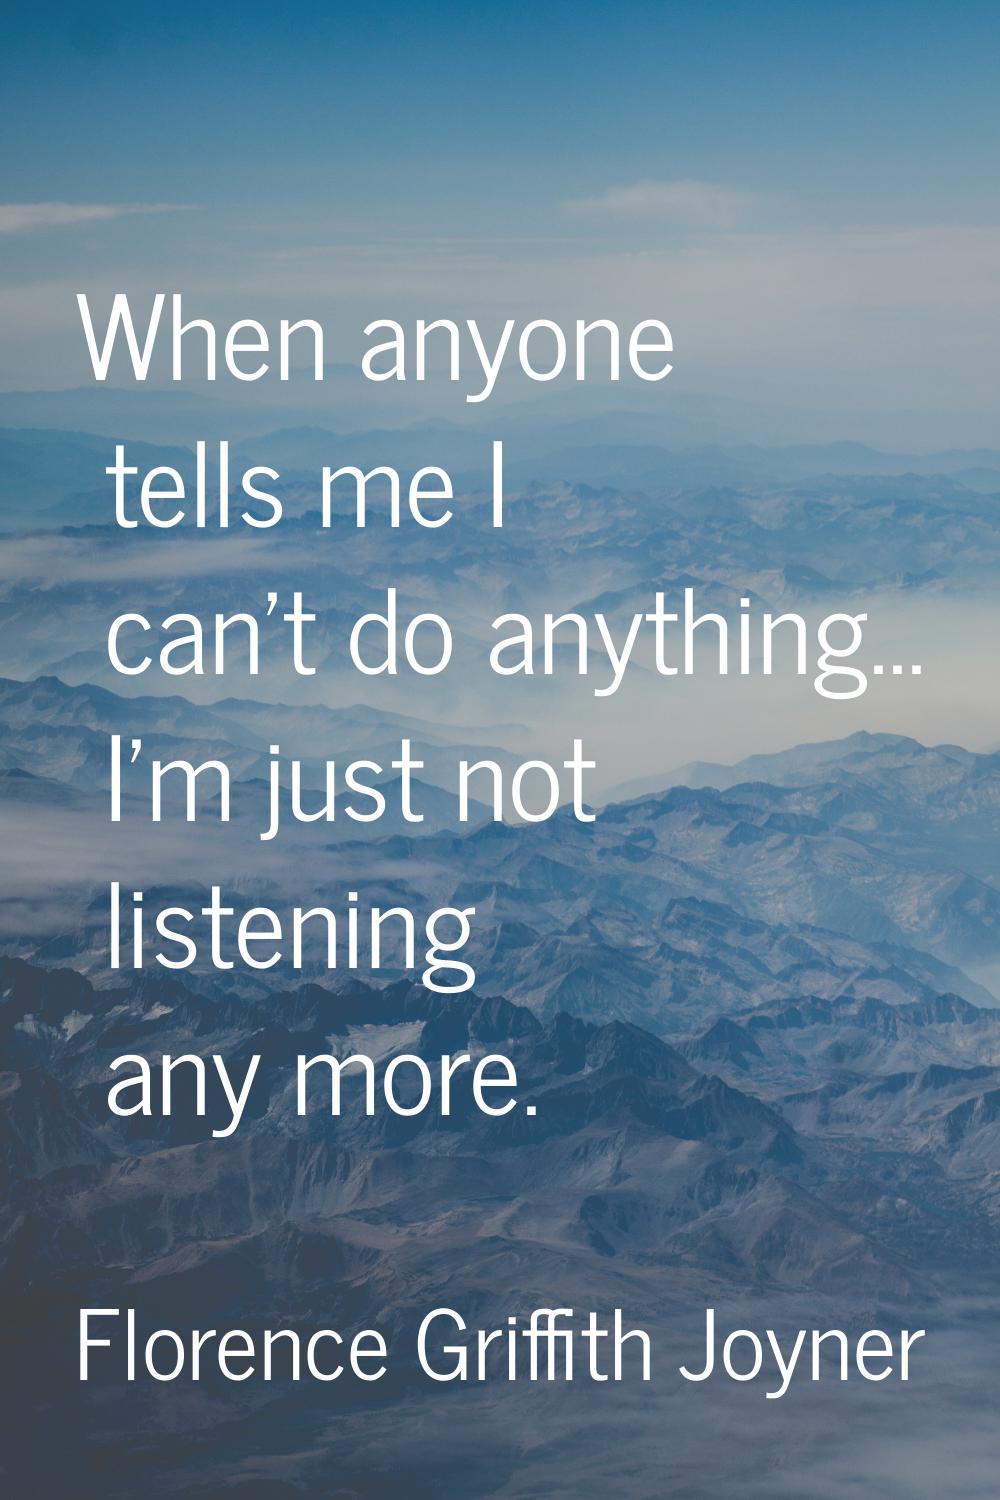 When anyone tells me I can't do anything... I'm just not listening any more.